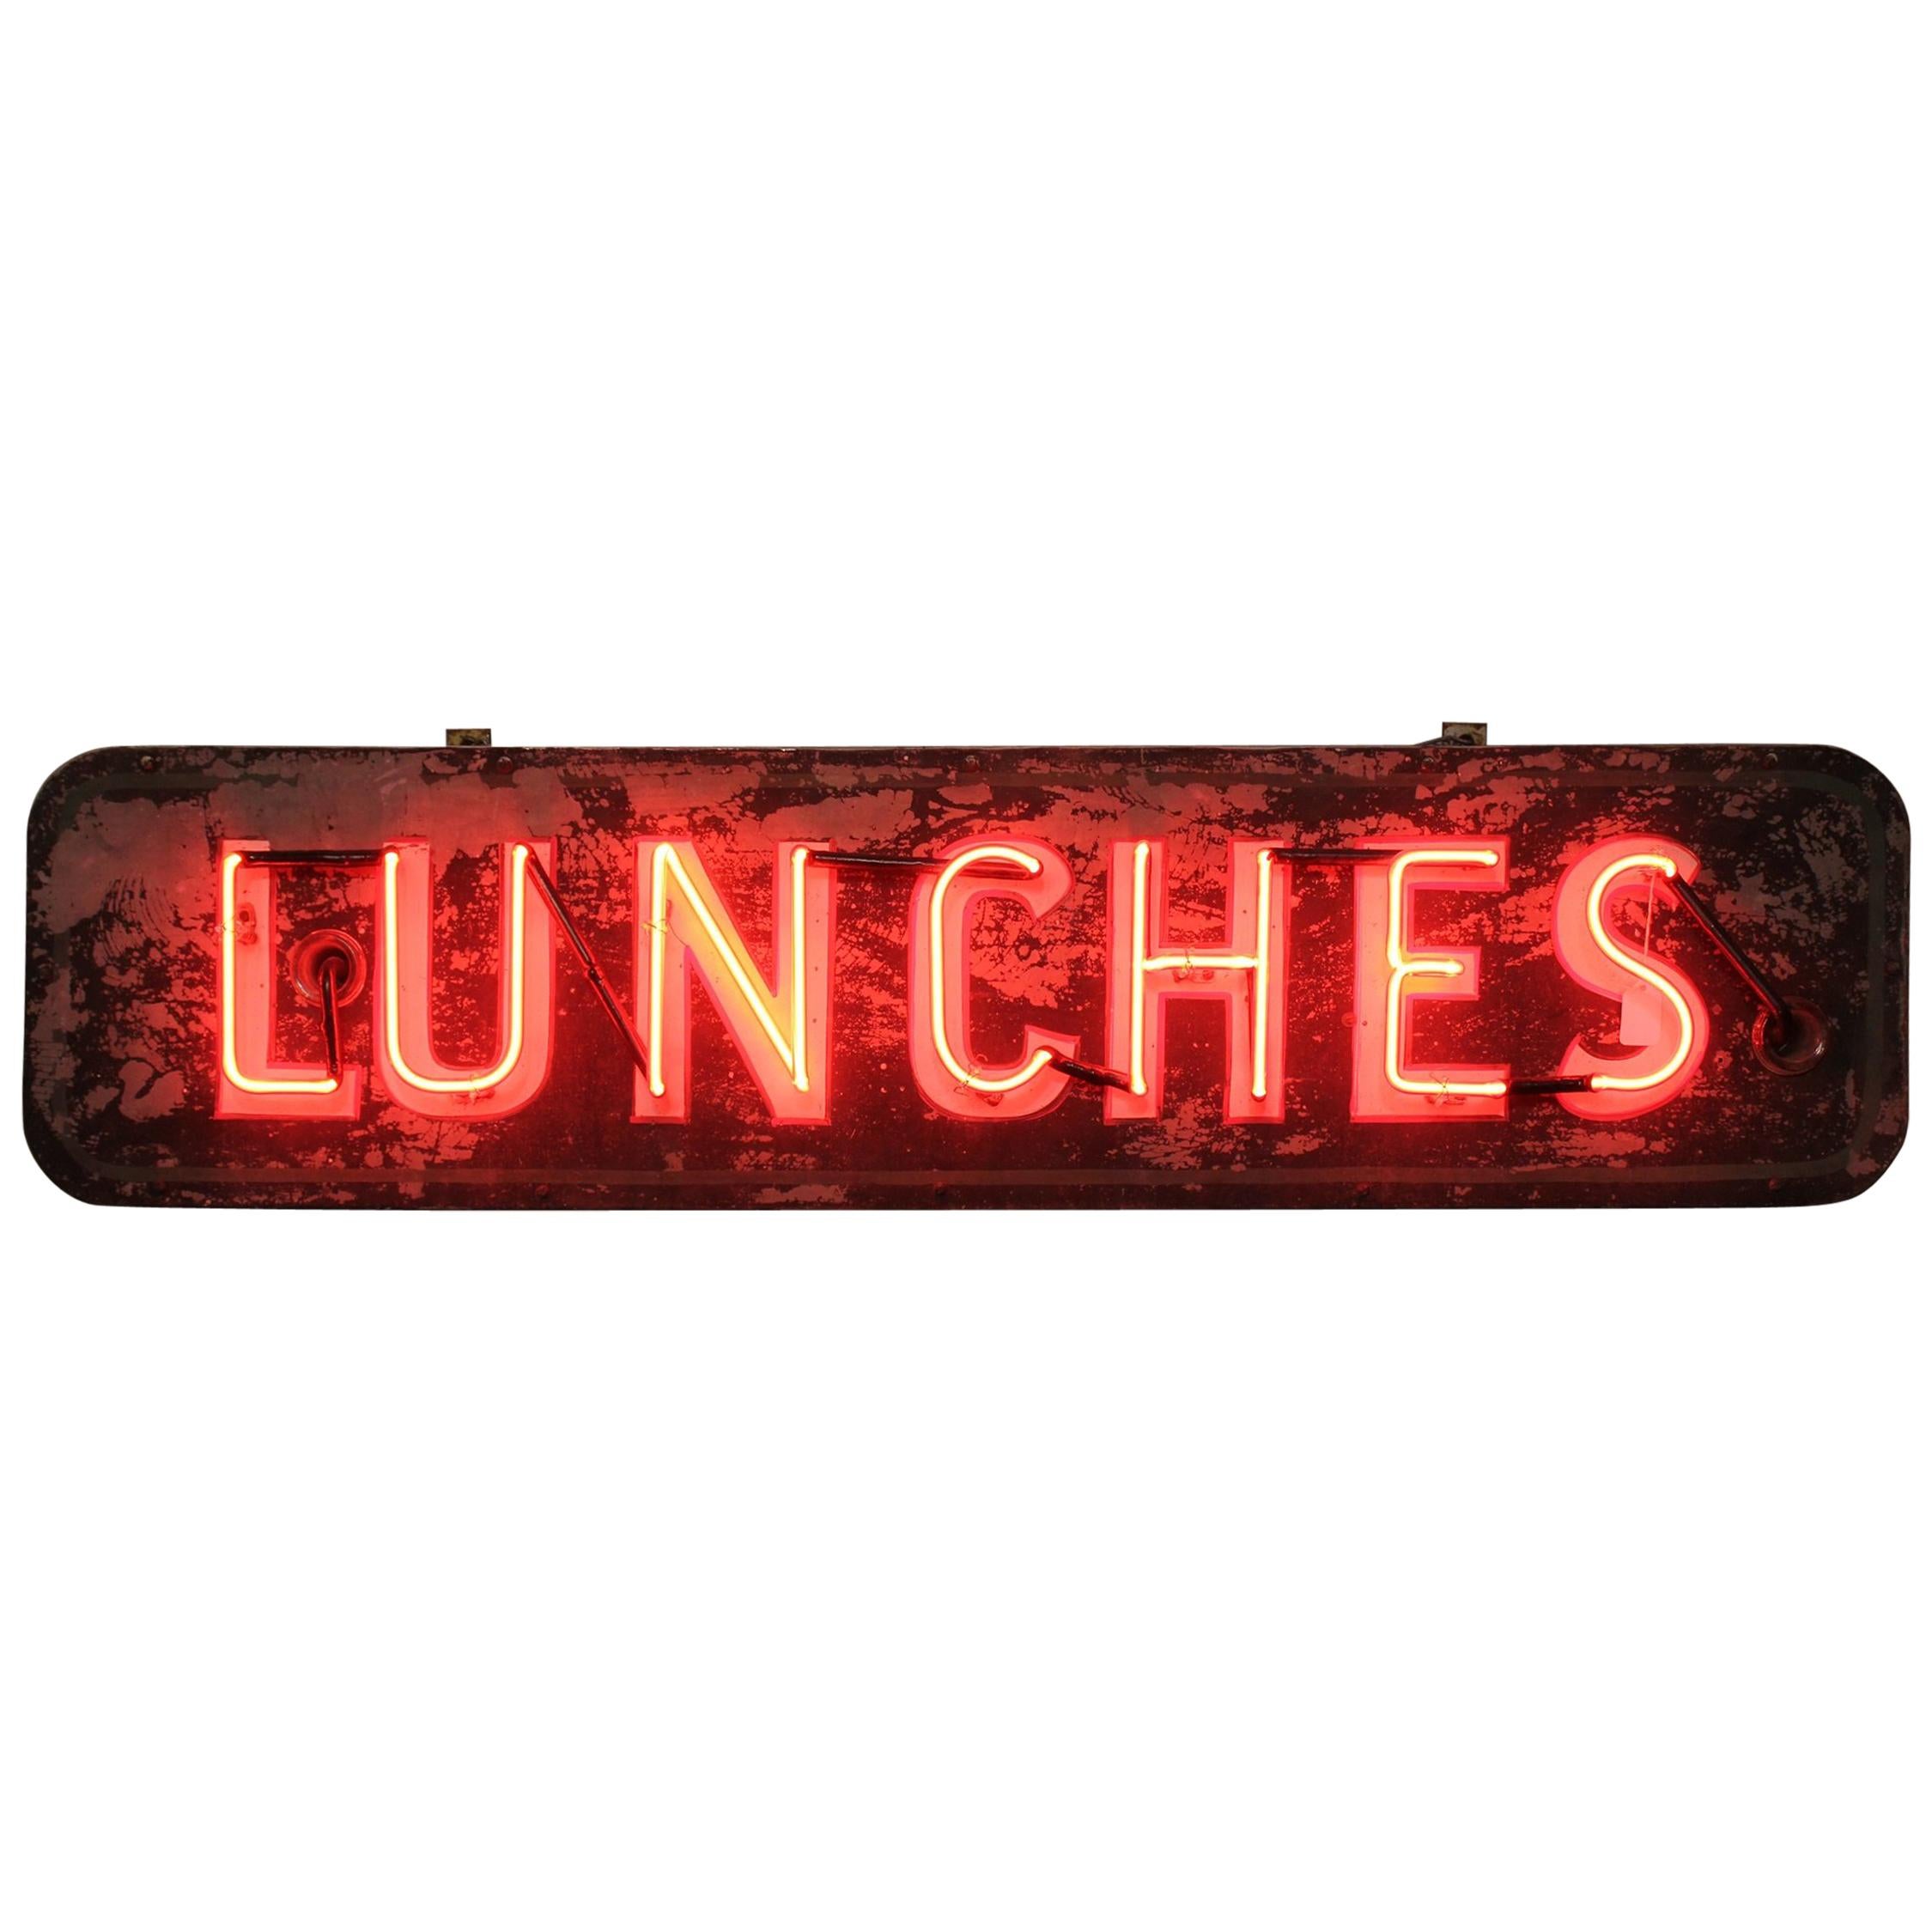 1930s Neon Sign Lunches For Sale